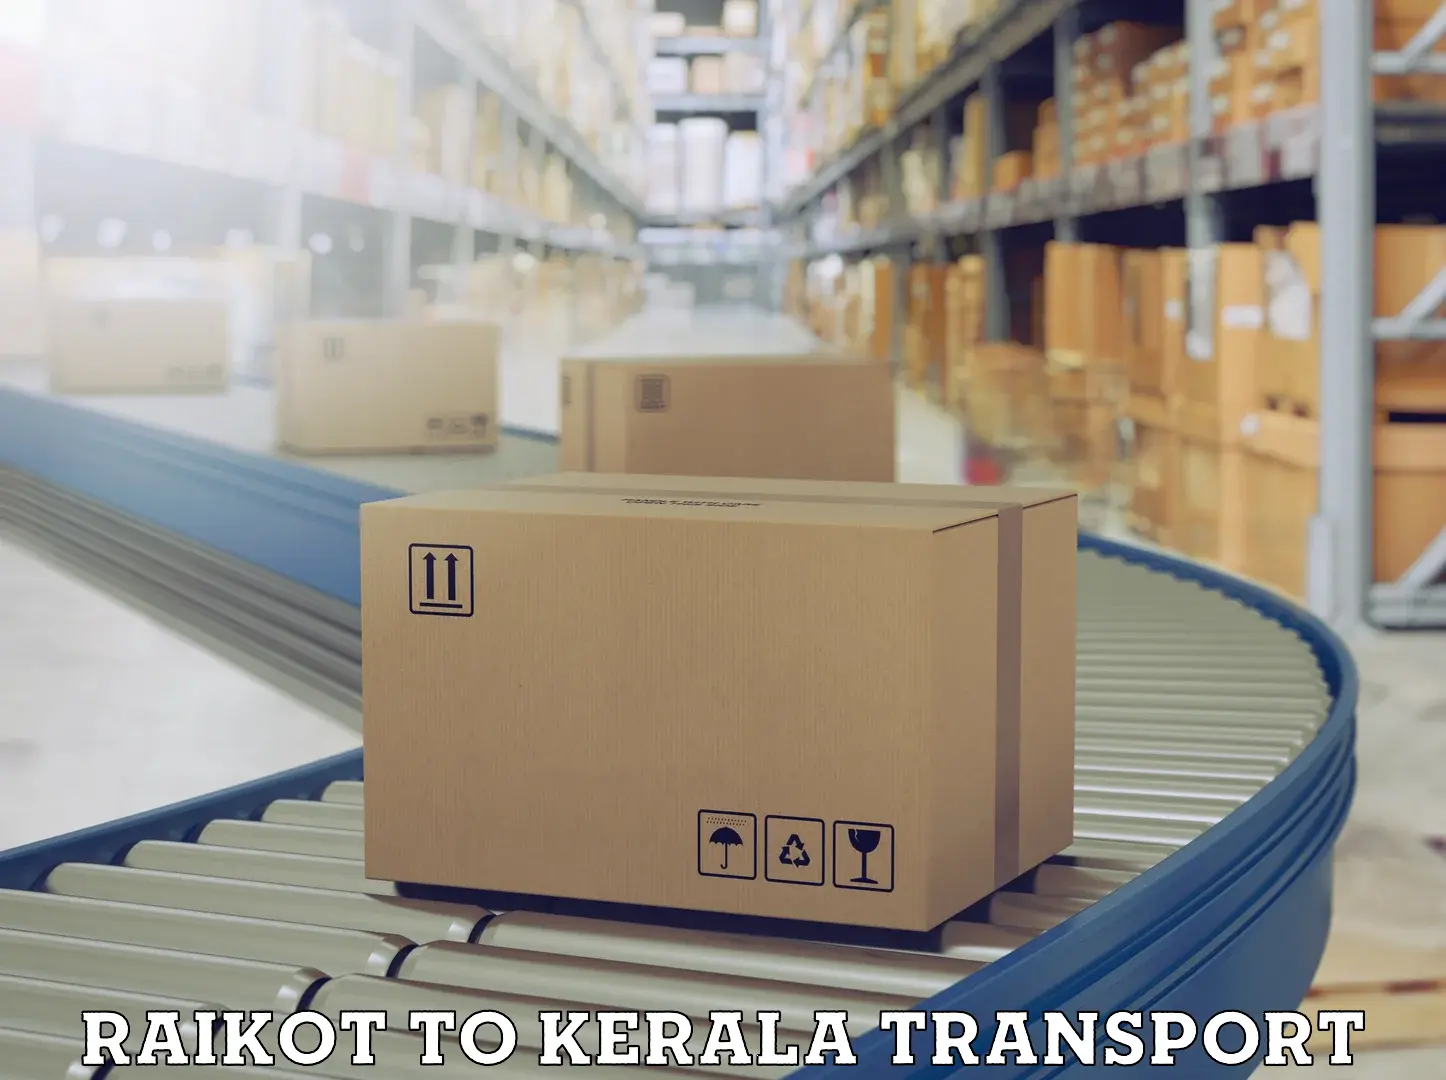 Commercial transport service Raikot to Payyanur